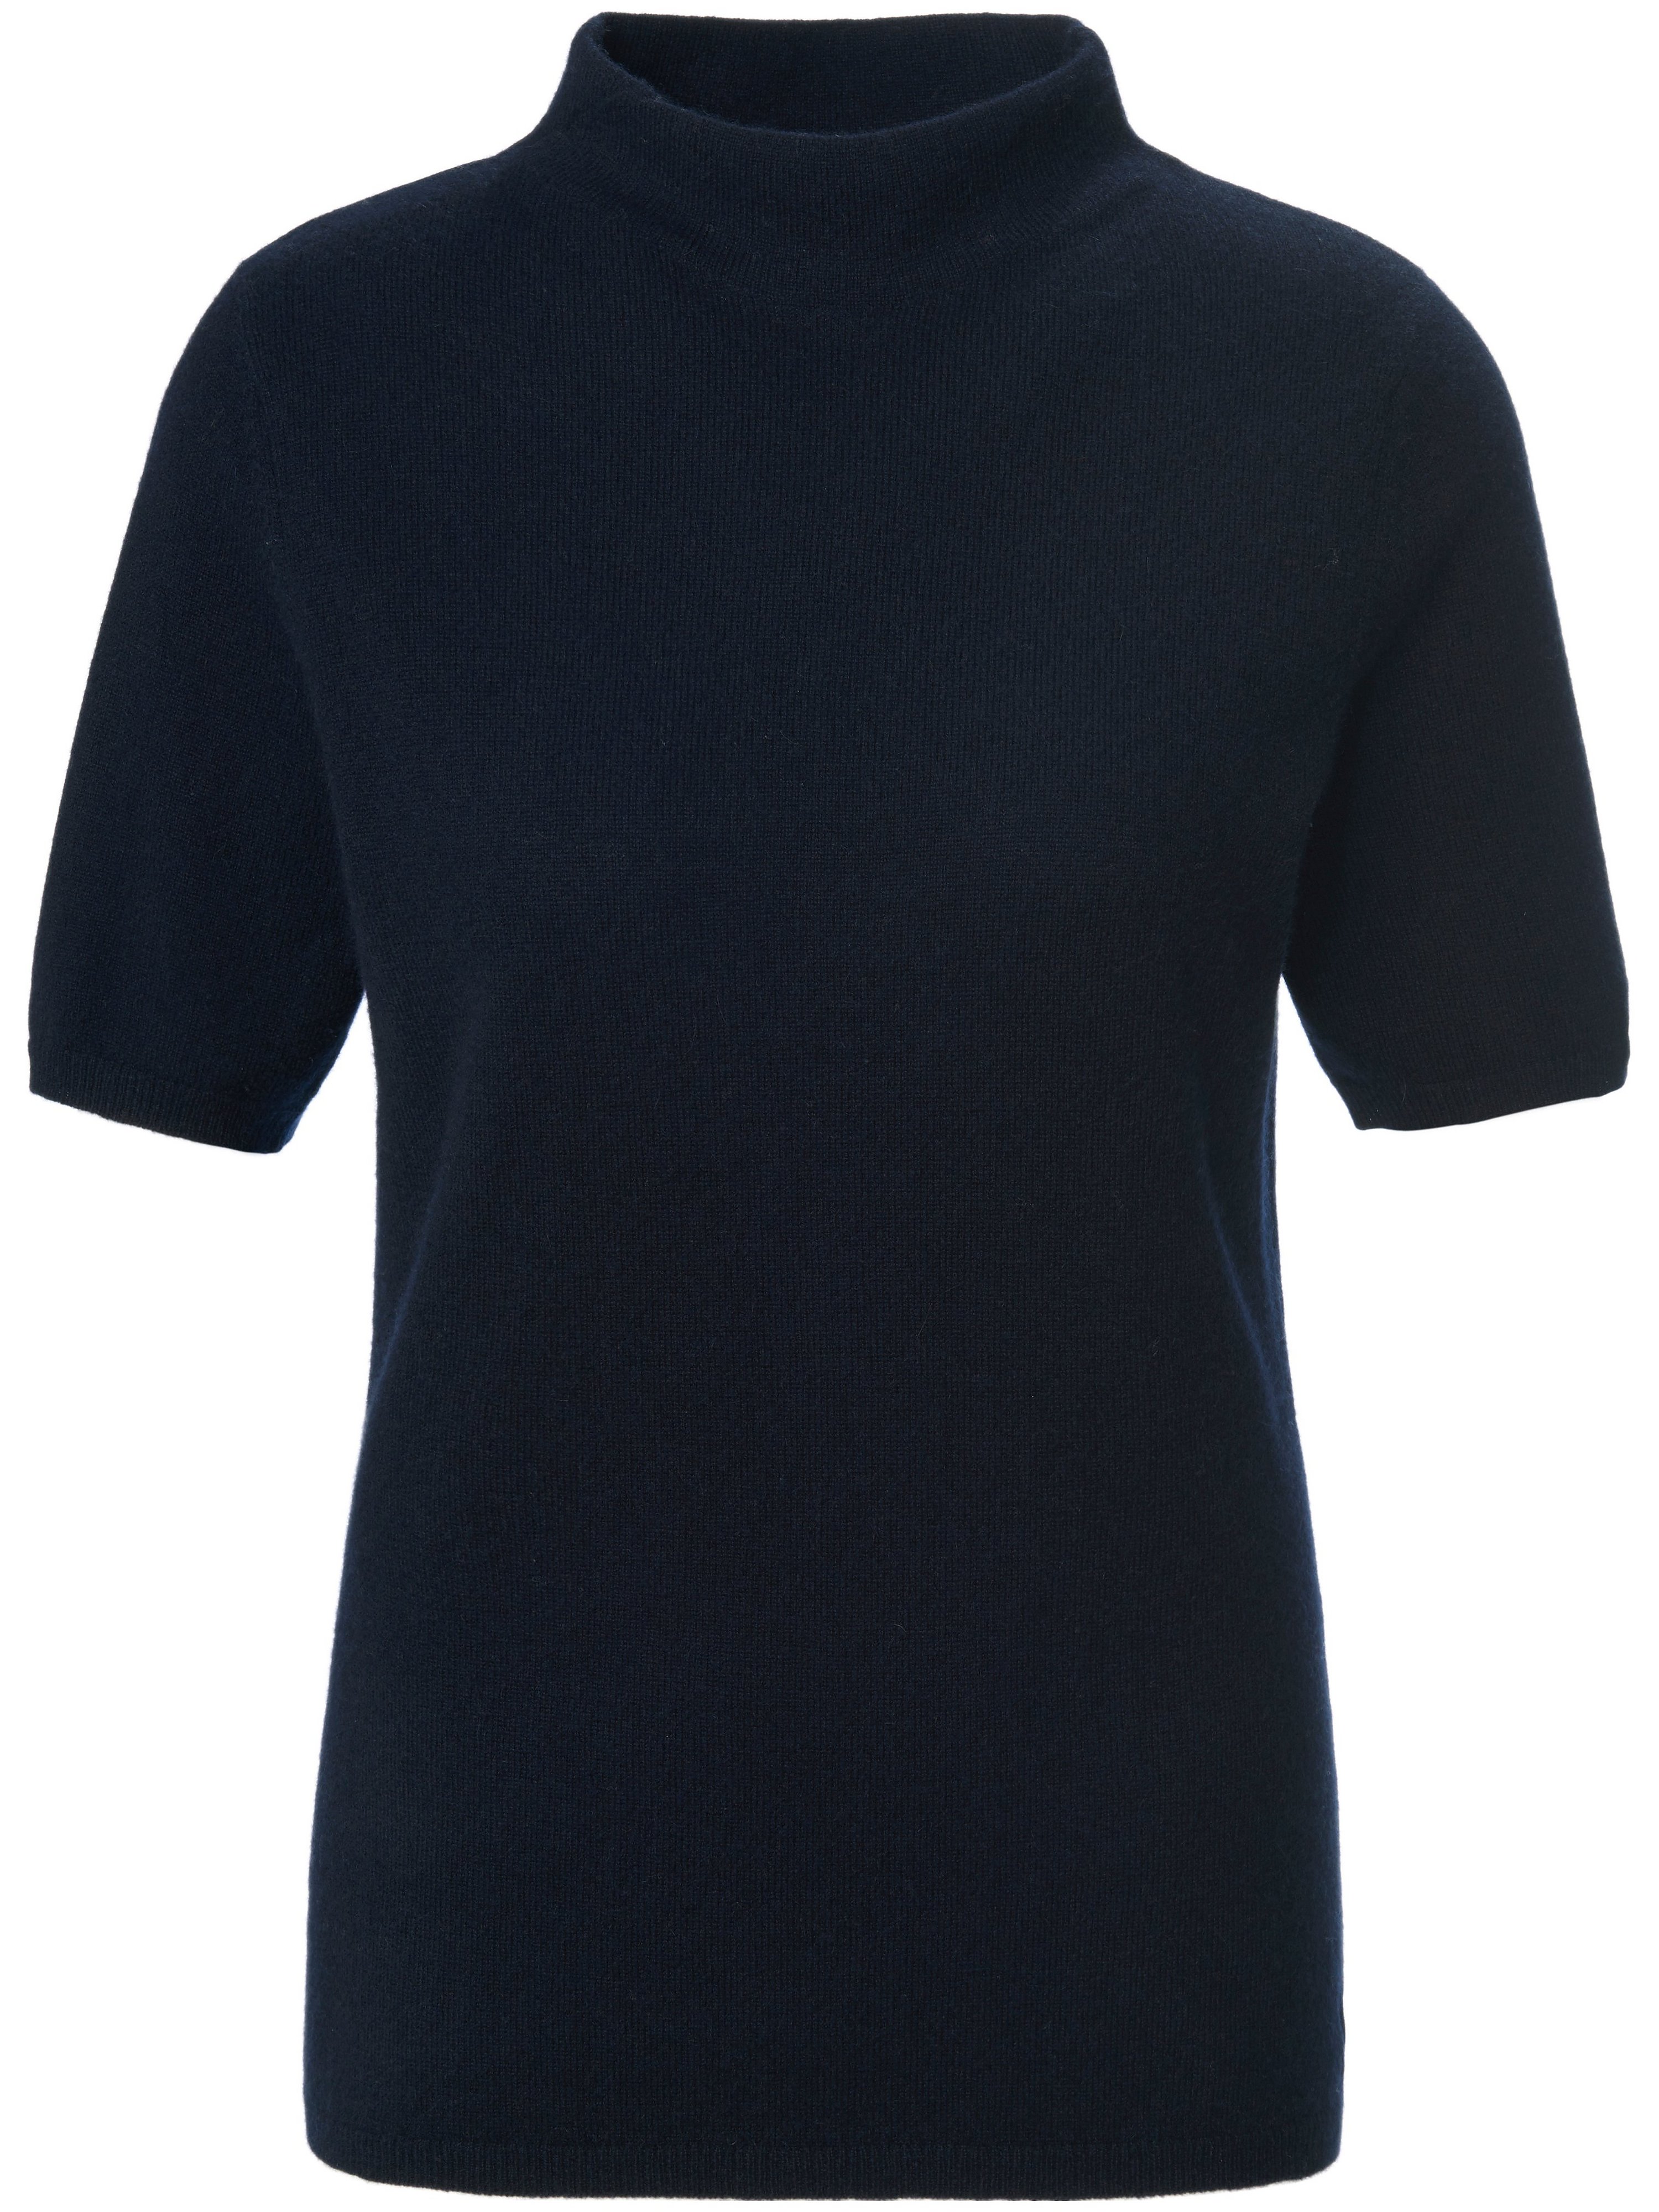 Le pull 100% cachemire  Fadenmeister Berlin bleu taille 38